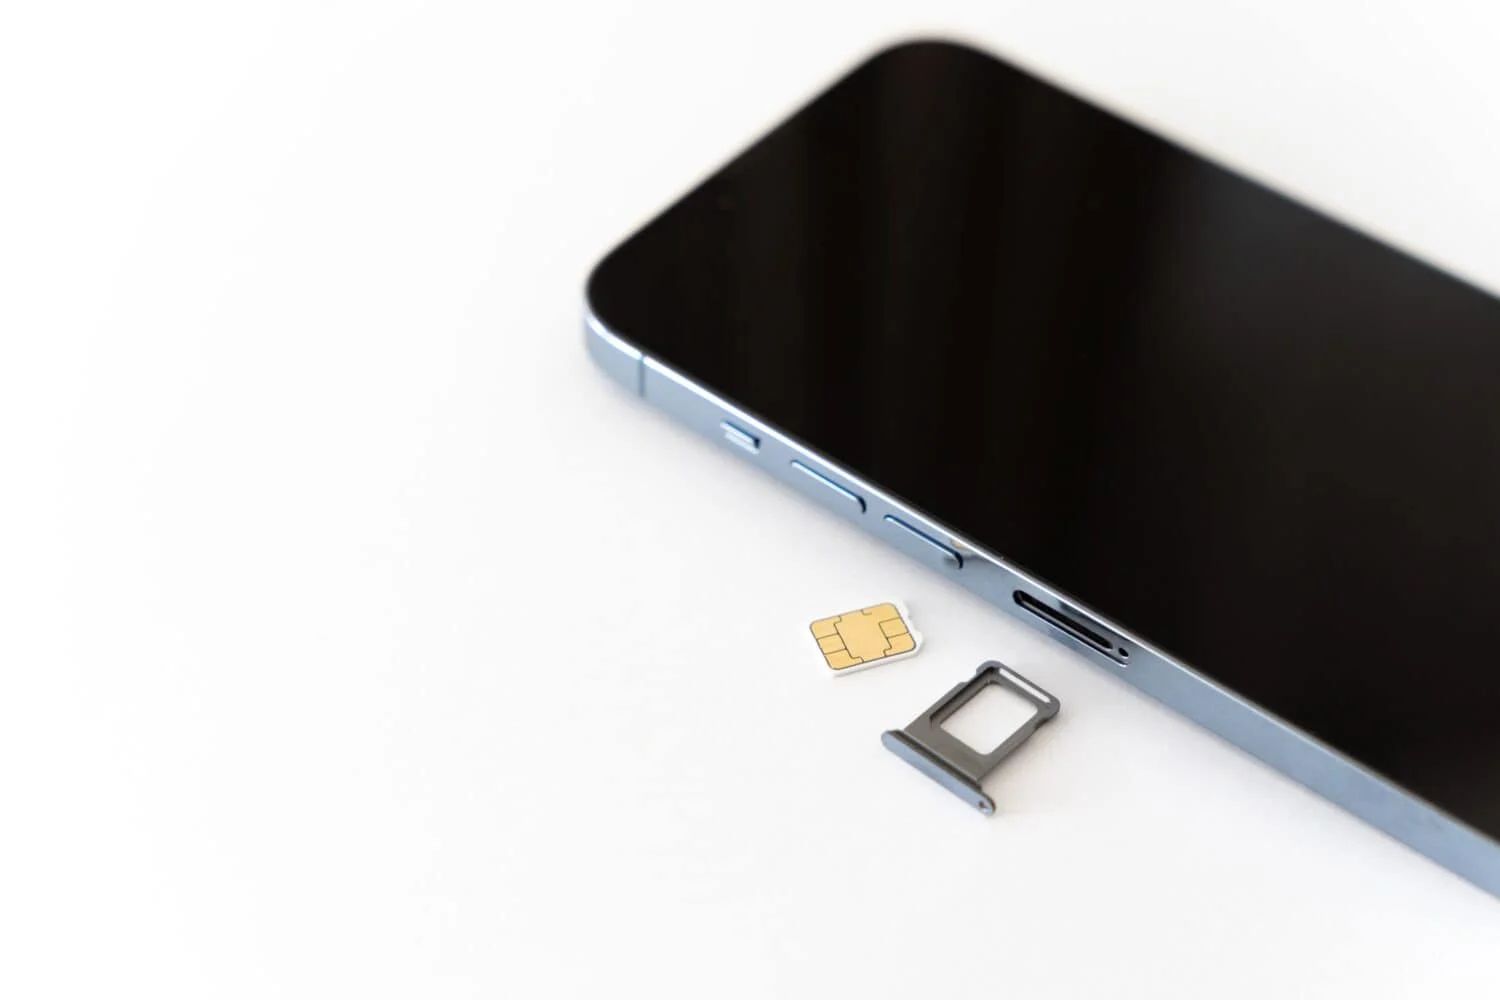 locating-sim-card-slot-on-iphone-6-a-quick-guide